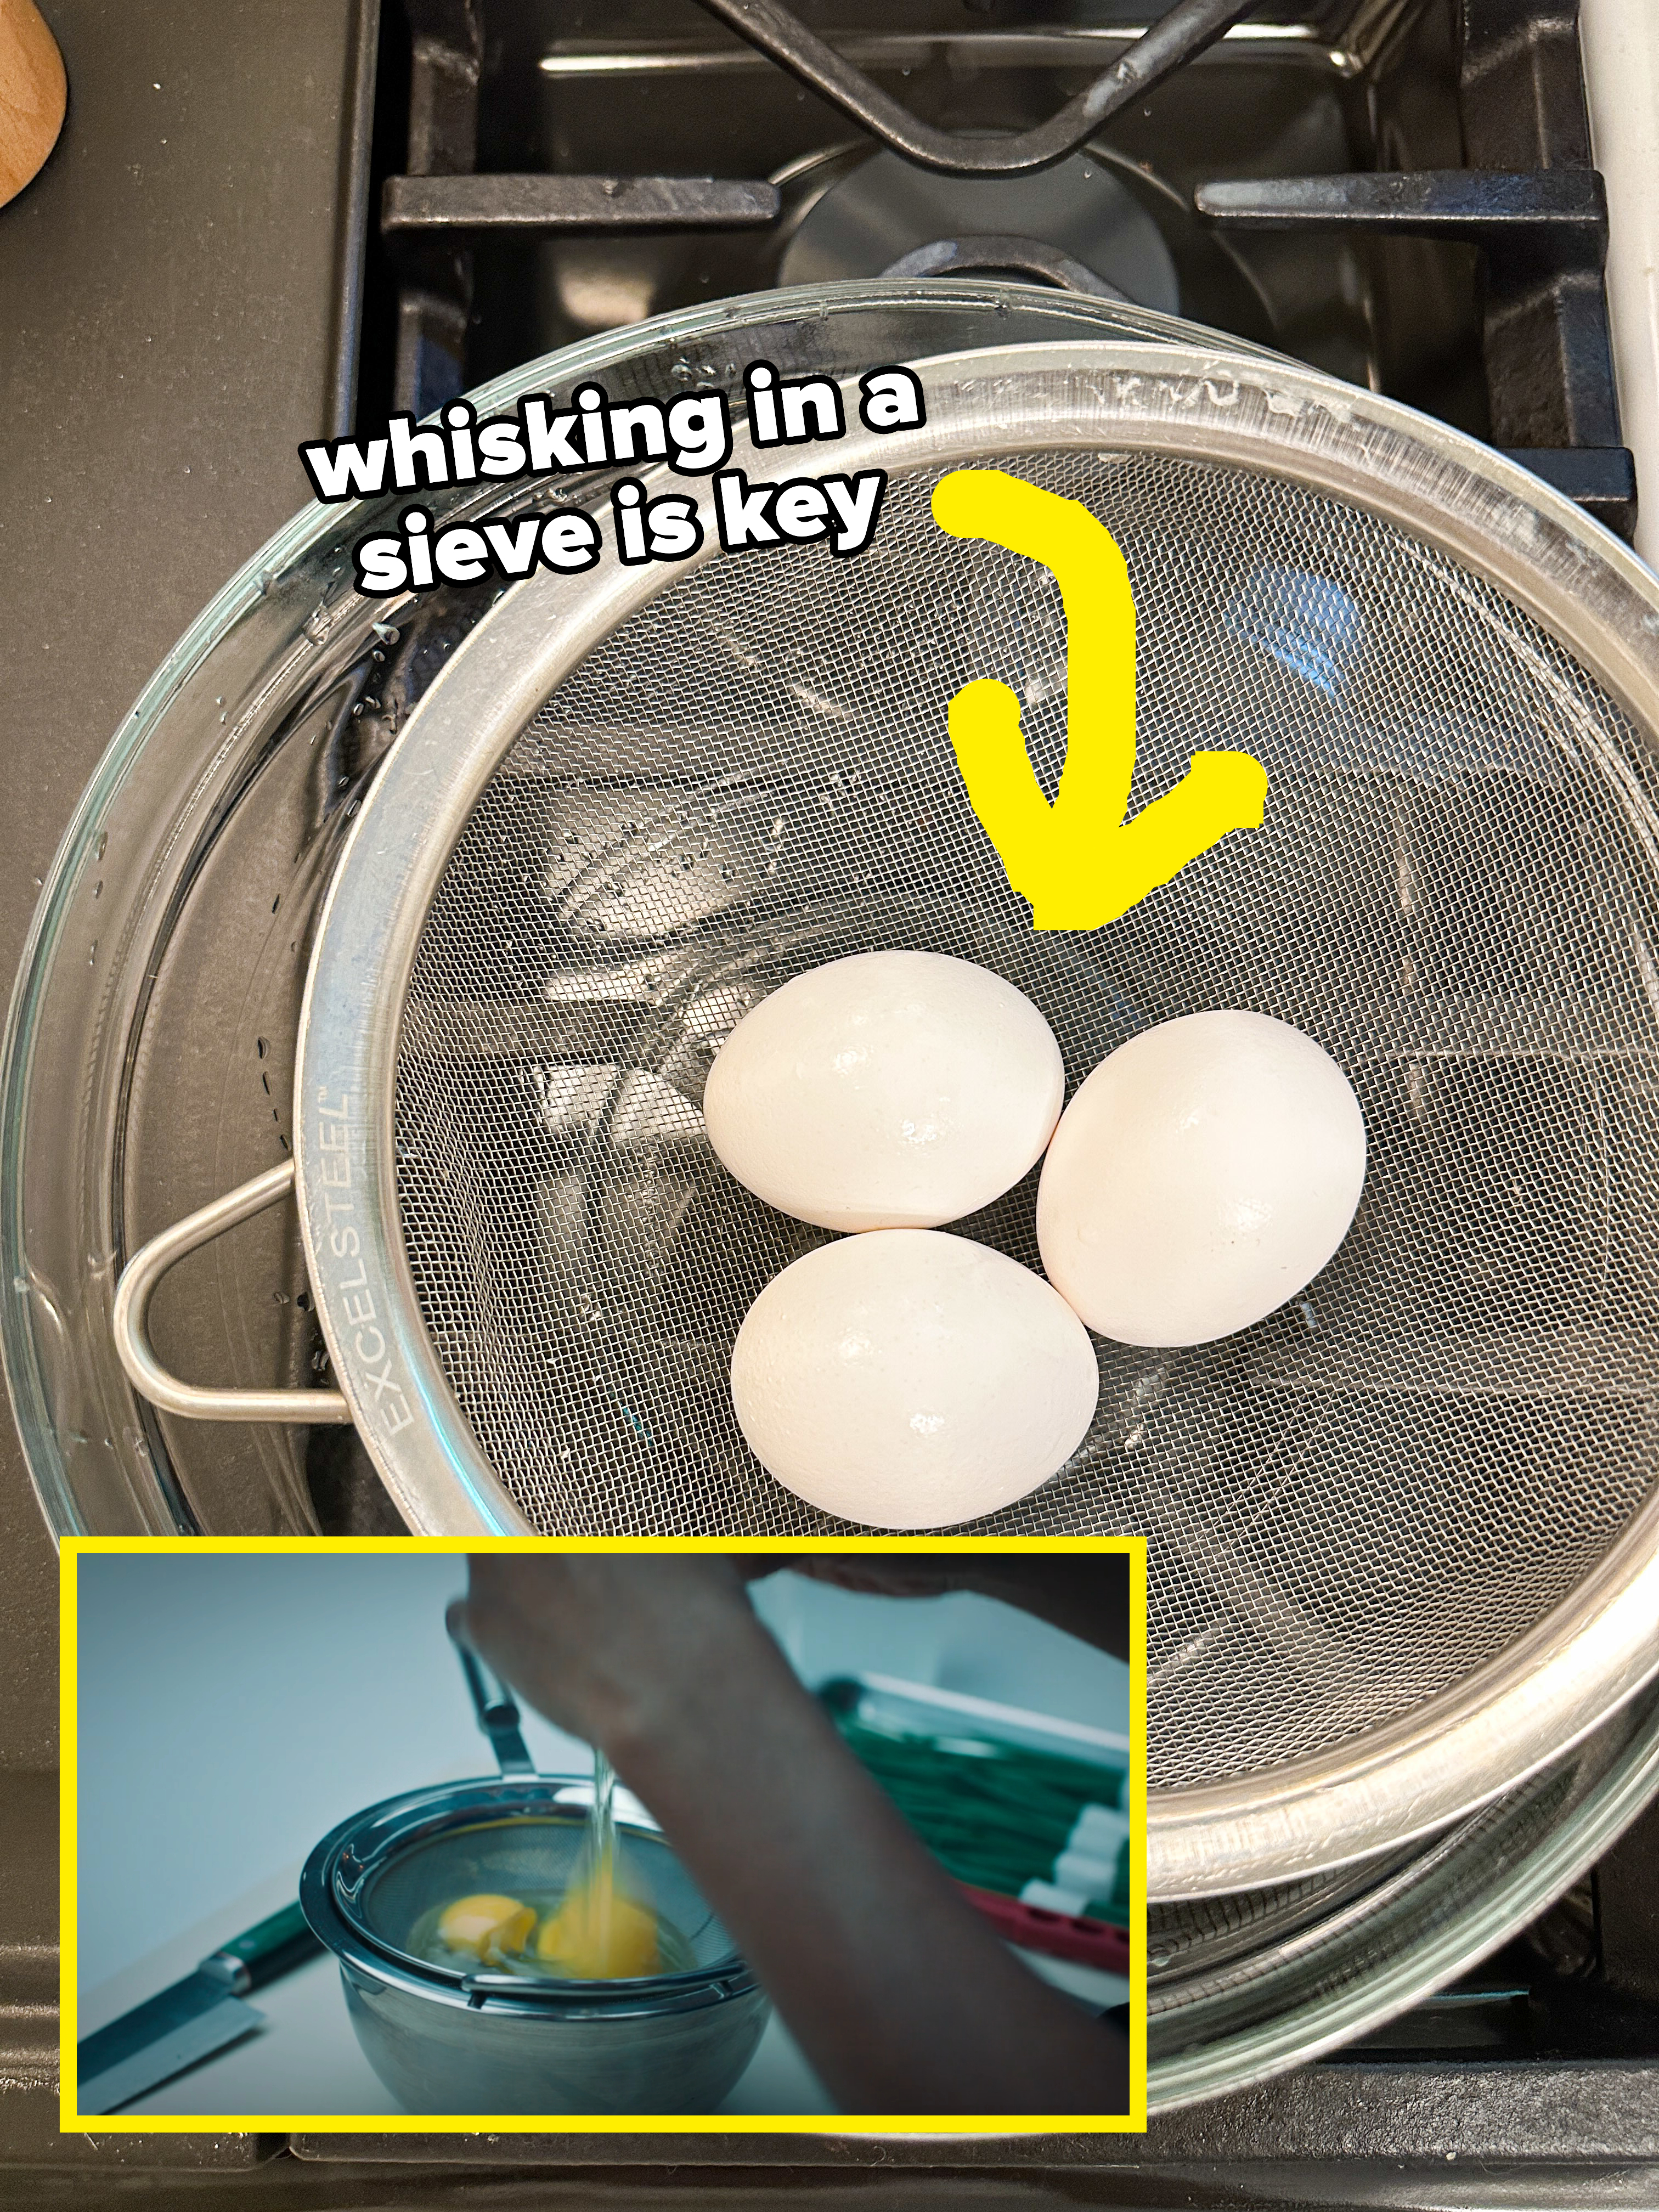 cracking eggs into a metal sieve overtop a mixing bowl